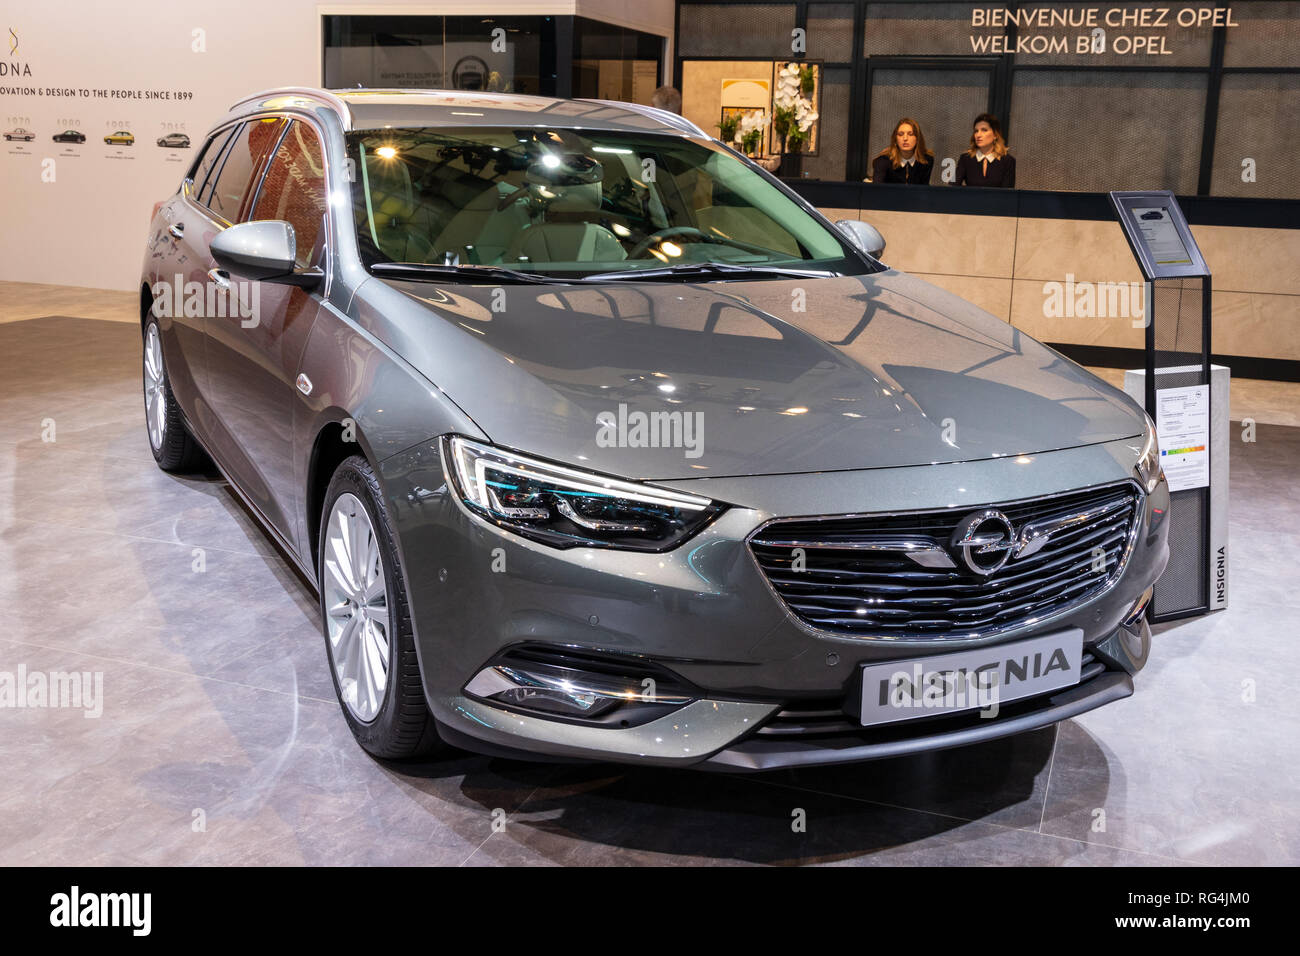 BRUSSELS - JAN 18, 2019: Opel Insignia car showcased at the 97th Brussels  Motor Show 2019 Autosalon Stock Photo - Alamy